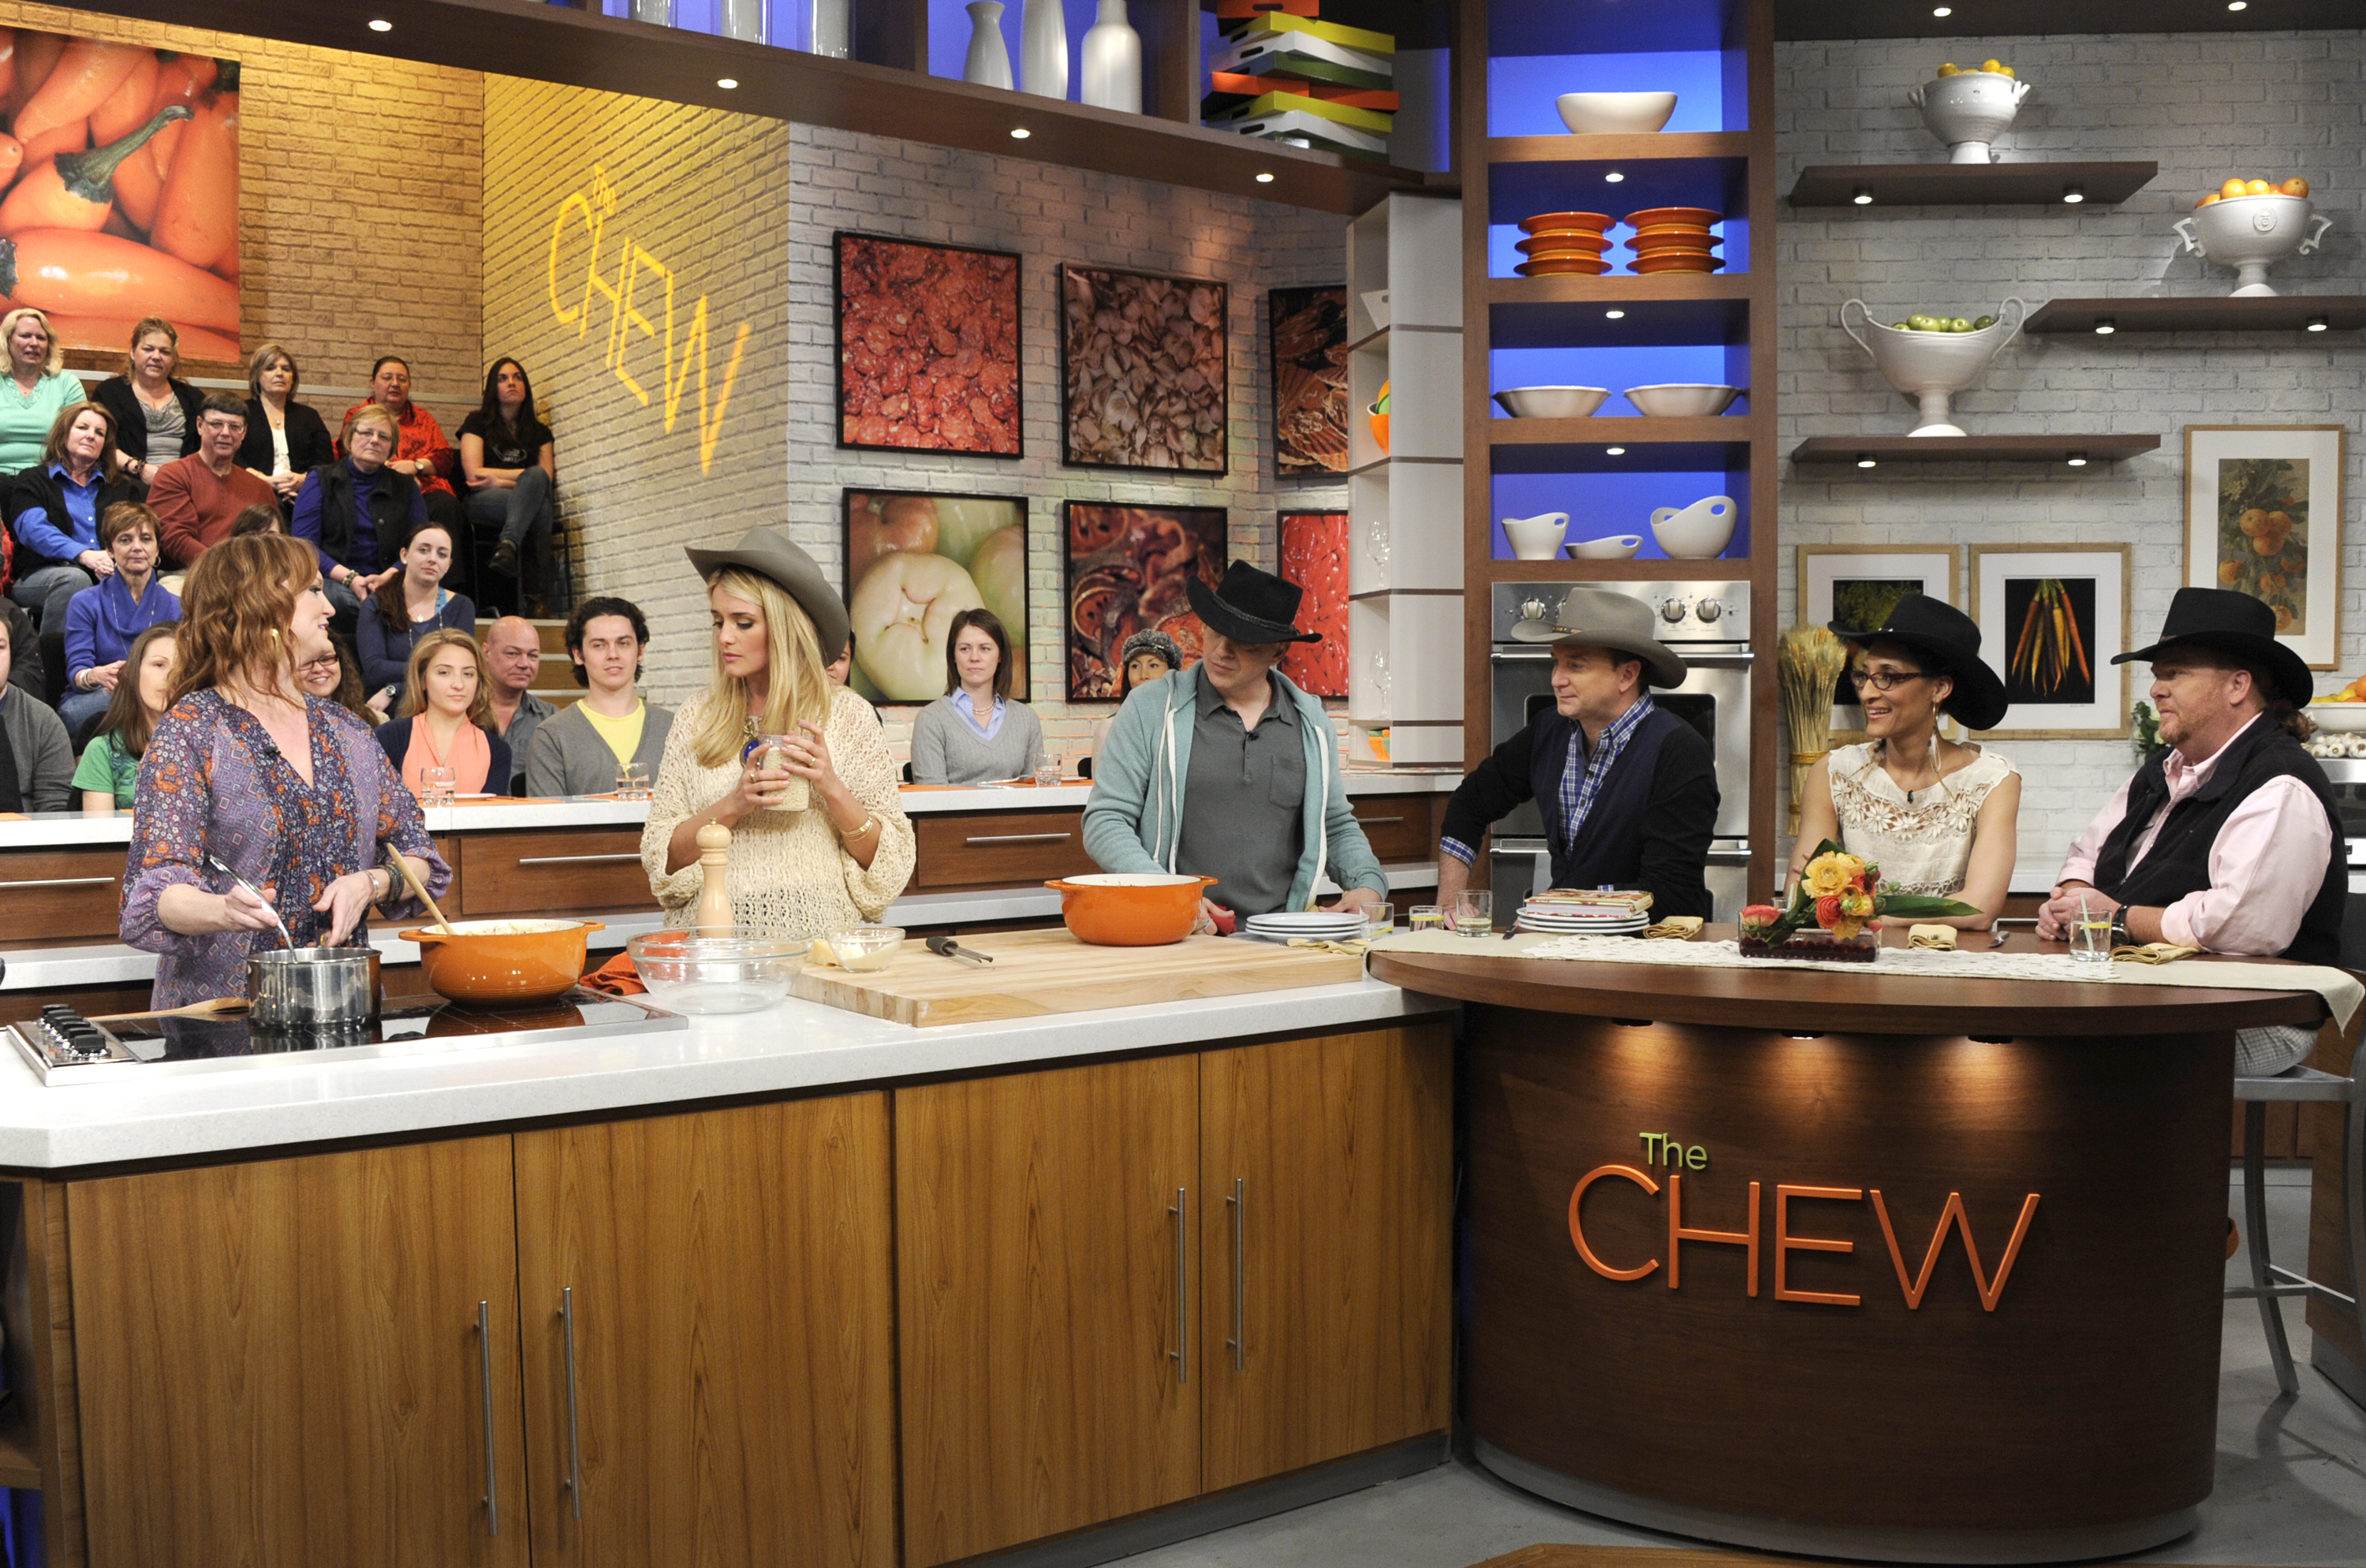 The Pioneer Woman Ree Drummond does a cooking demonstration on The Chew.